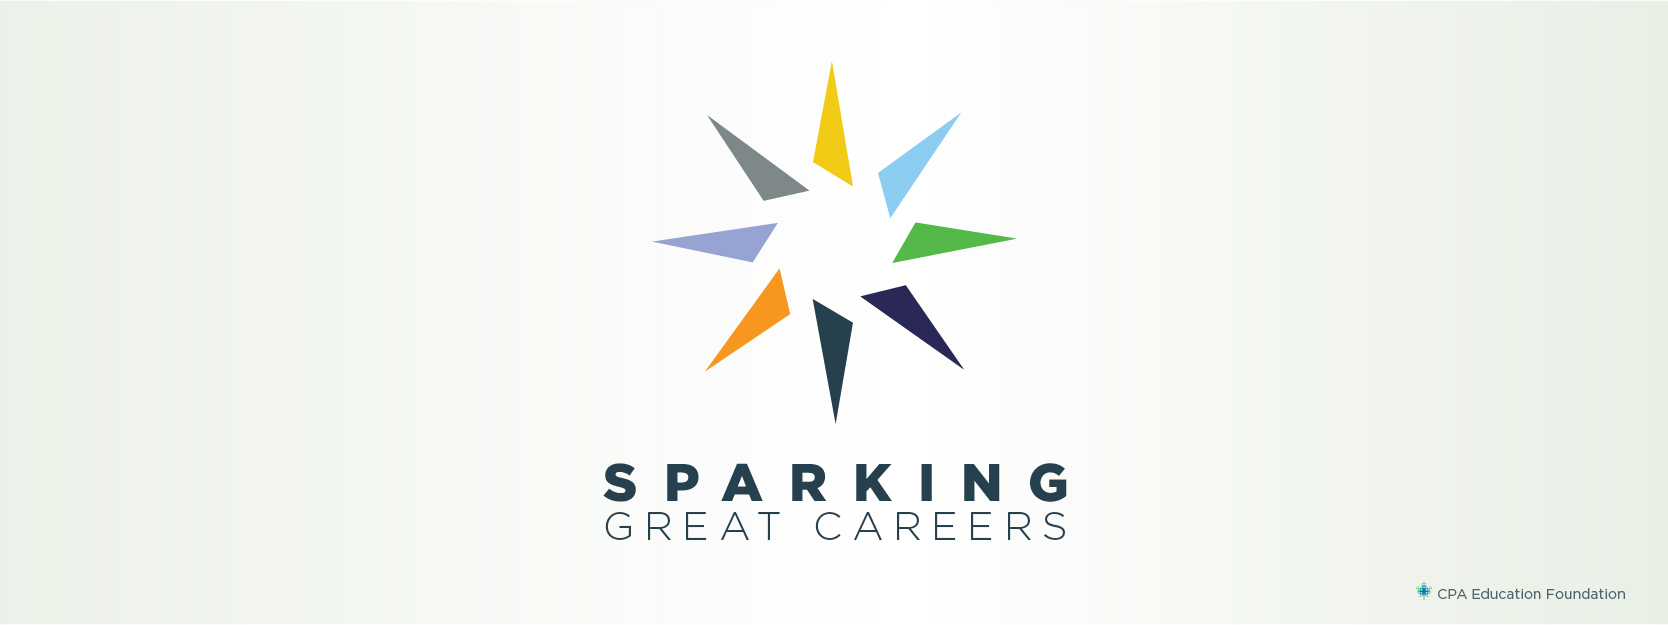 Sparking Great Careers Logo, starburst colourful star